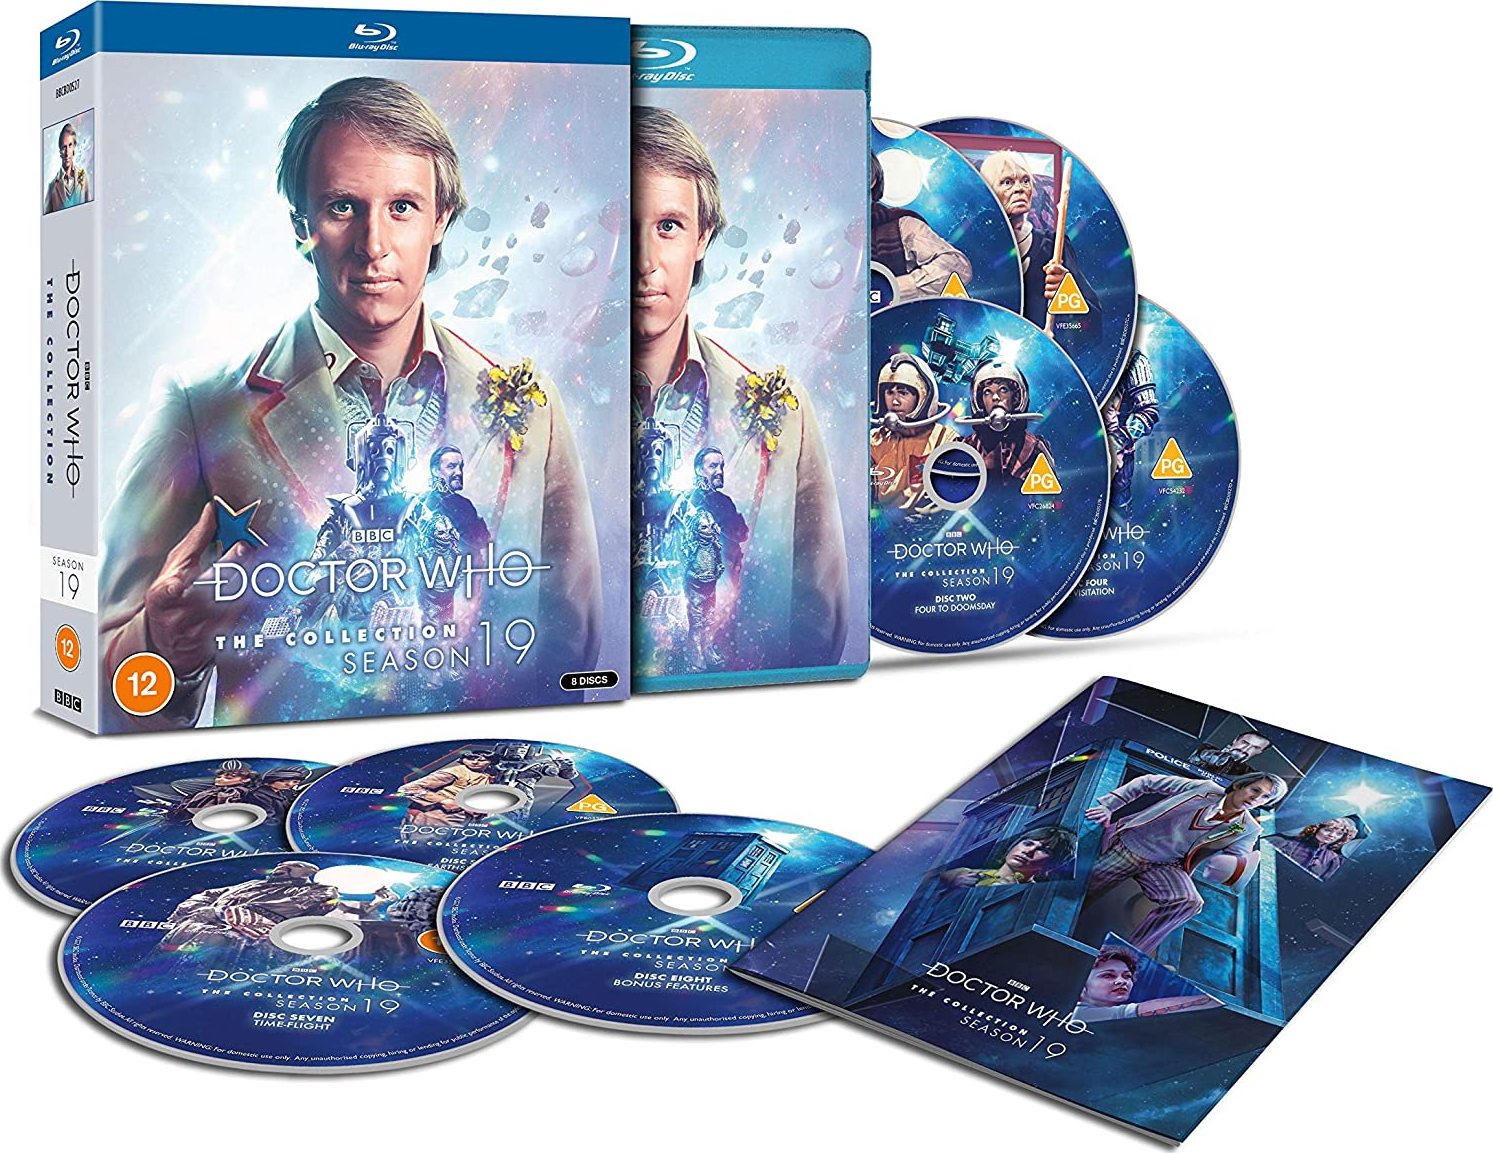 Doctor Who The Collection Season 19 Bluray Release Date May 31